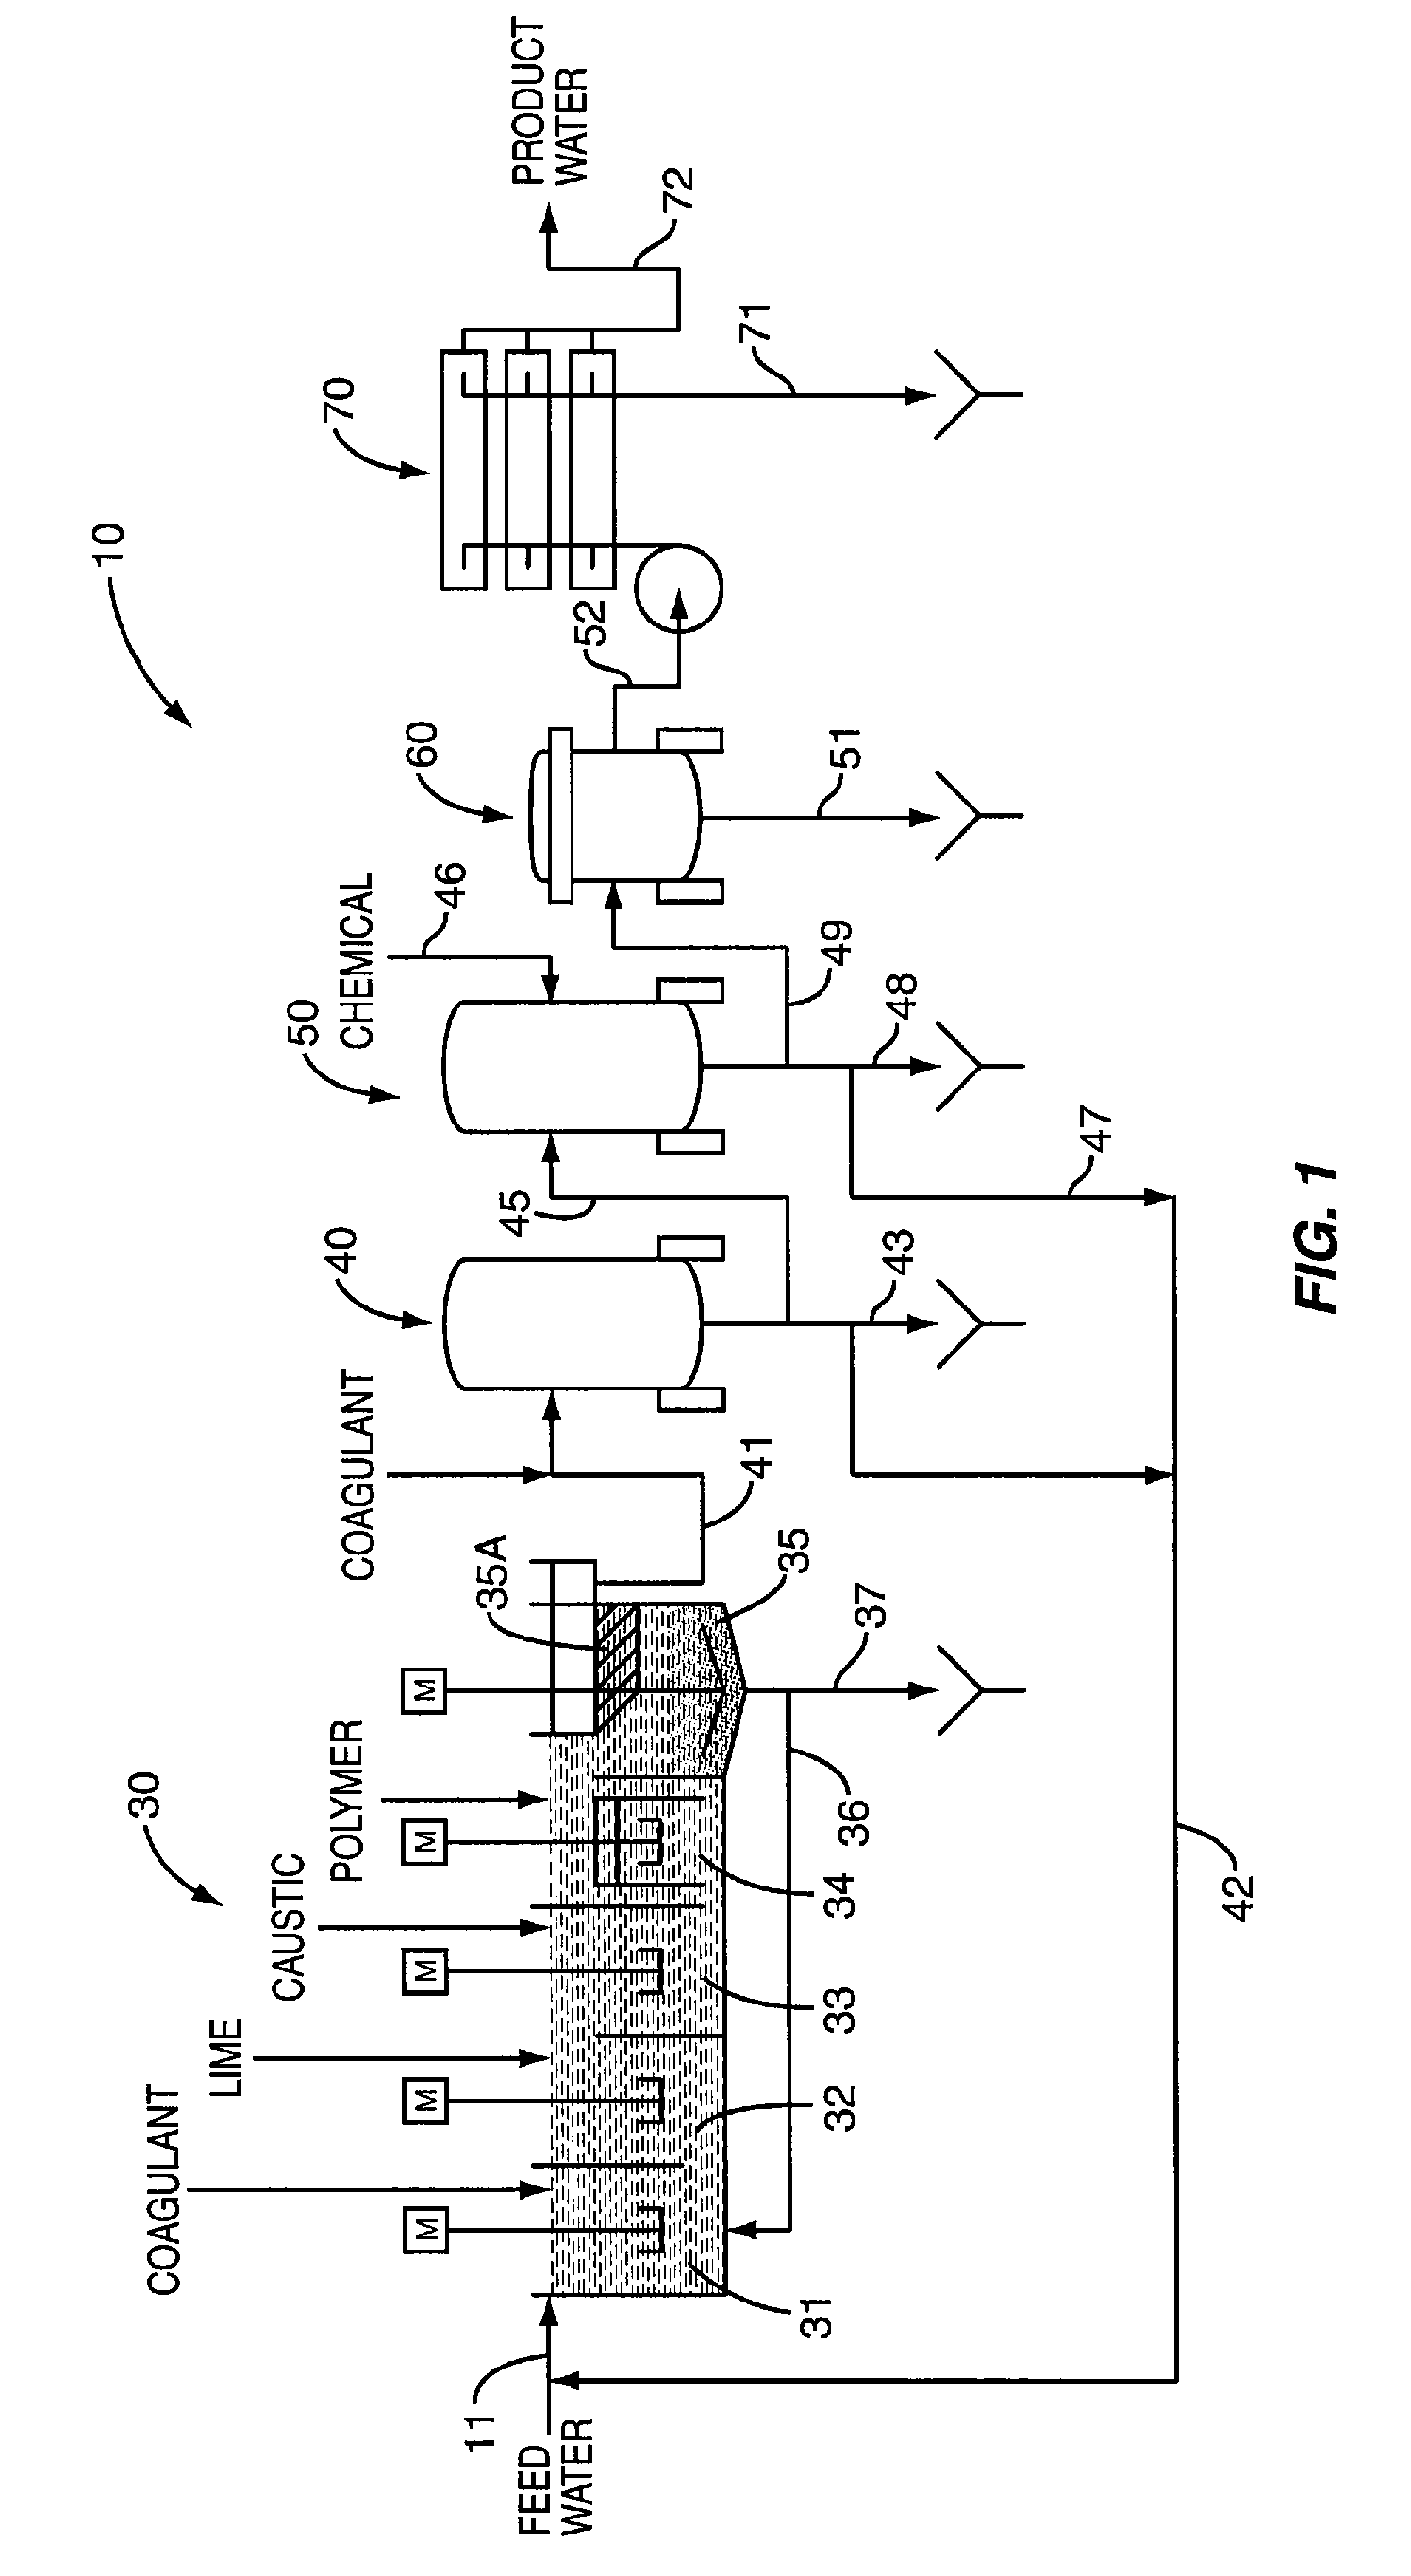 Method for Treating Wastewater or Produced Water